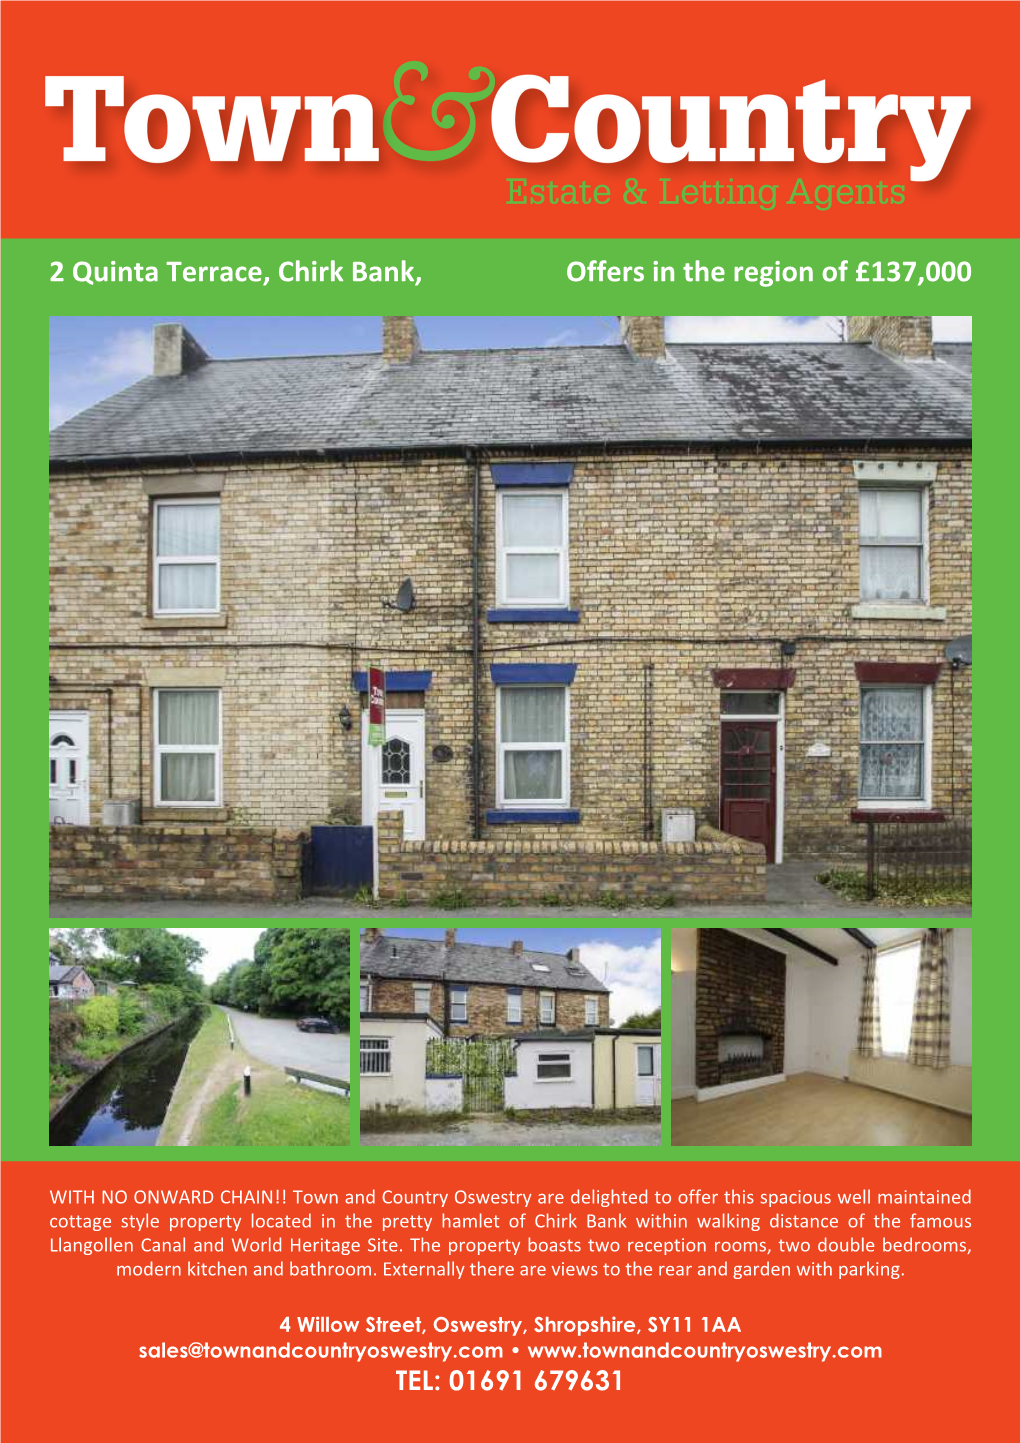 2 Quinta Terrace, Chirk Bank, Offers in the Region of £137,000